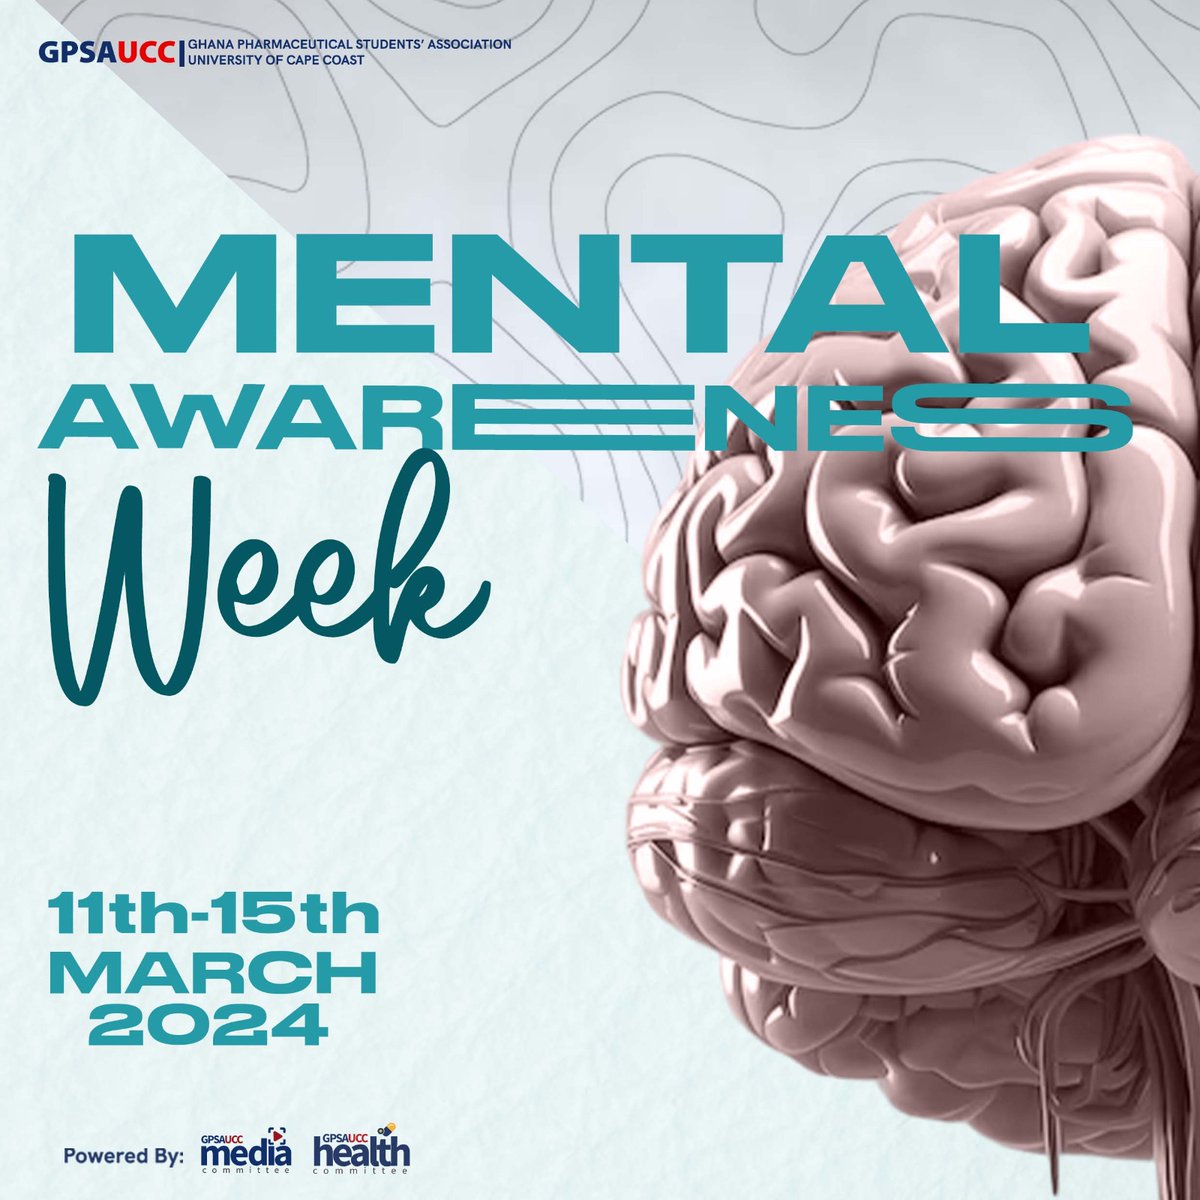 🧠 🧠 🧠 🧠 🧠 🧠 🧠 It's our Health Week🧠🎊. Reach out to someone you are thinking of and ask them how they are doing. Mind Matters: Prioritizing Mental Health Awareness This Week. #MentalHealthAwareness